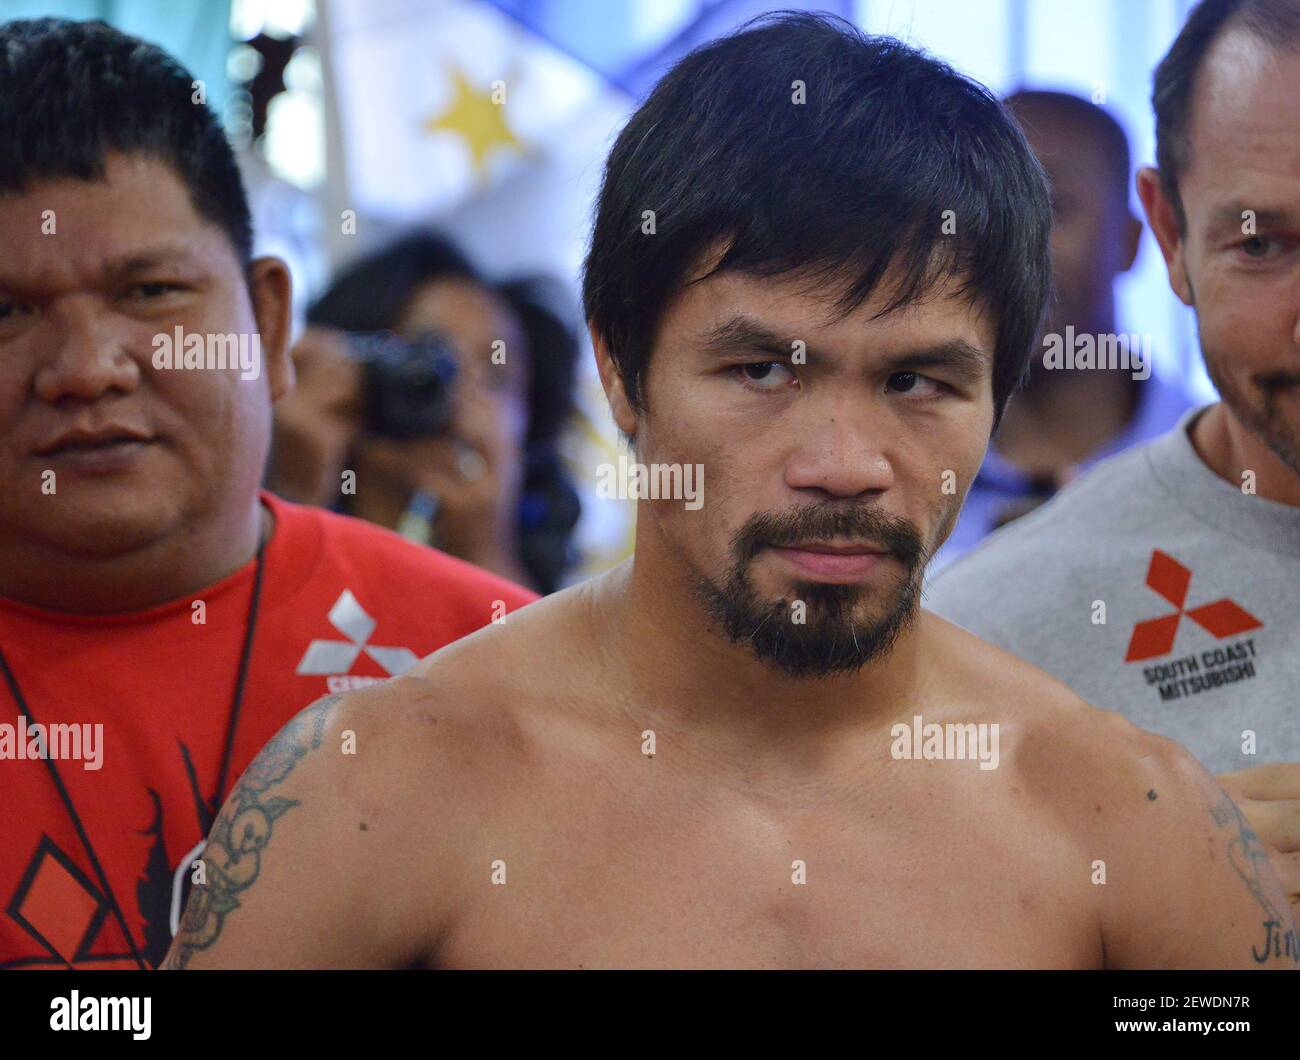 Manny Pacquiao at the Manny Pacquiao Los Angeles Media Workout held at the Wild Card Boxing Club in Los Angeles, CA on Wednesday, March 30, 2016 (Photo By Sthanlee B. Mirador) *** Please Use Credit from Credit Field *** Stock Photo